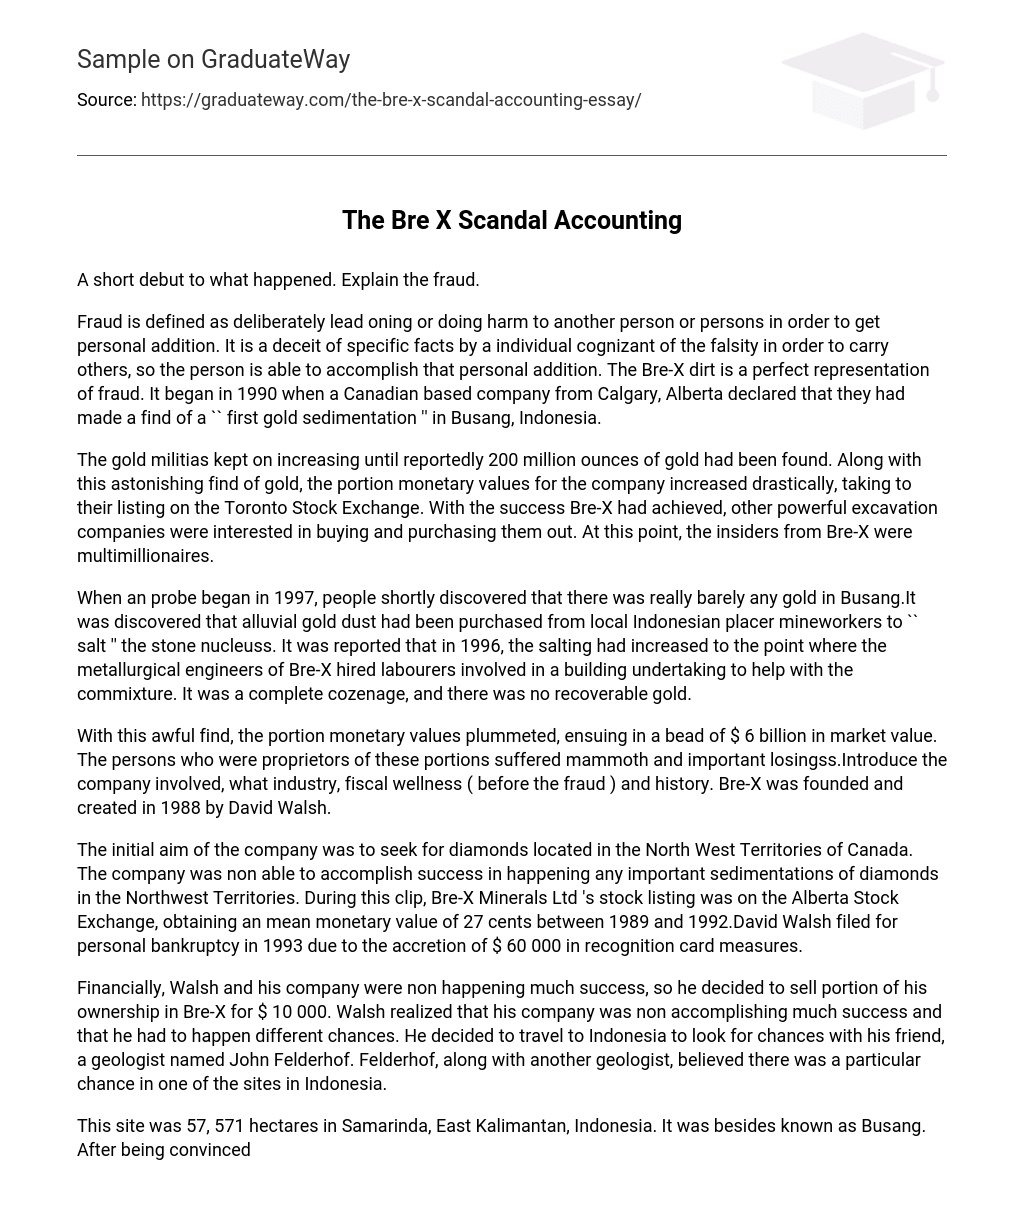 The Bre X Scandal Accounting Short Summary